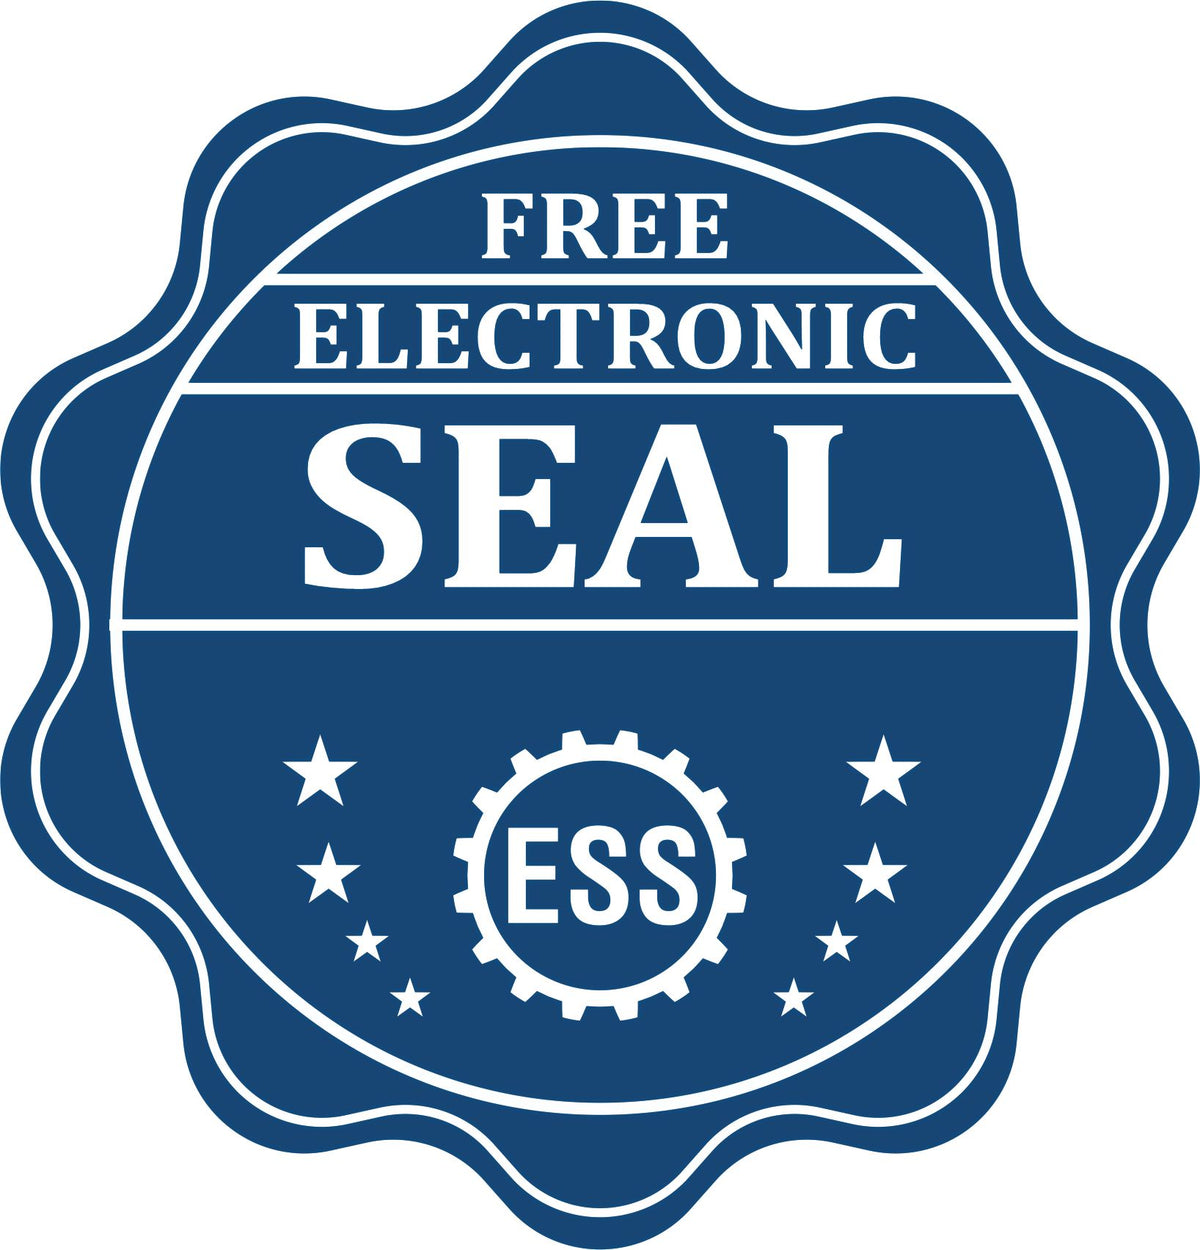 A badge showing a free electronic seal for the North Dakota Desk Architect Embossing Seal with stars and the ESS gear on the emblem.